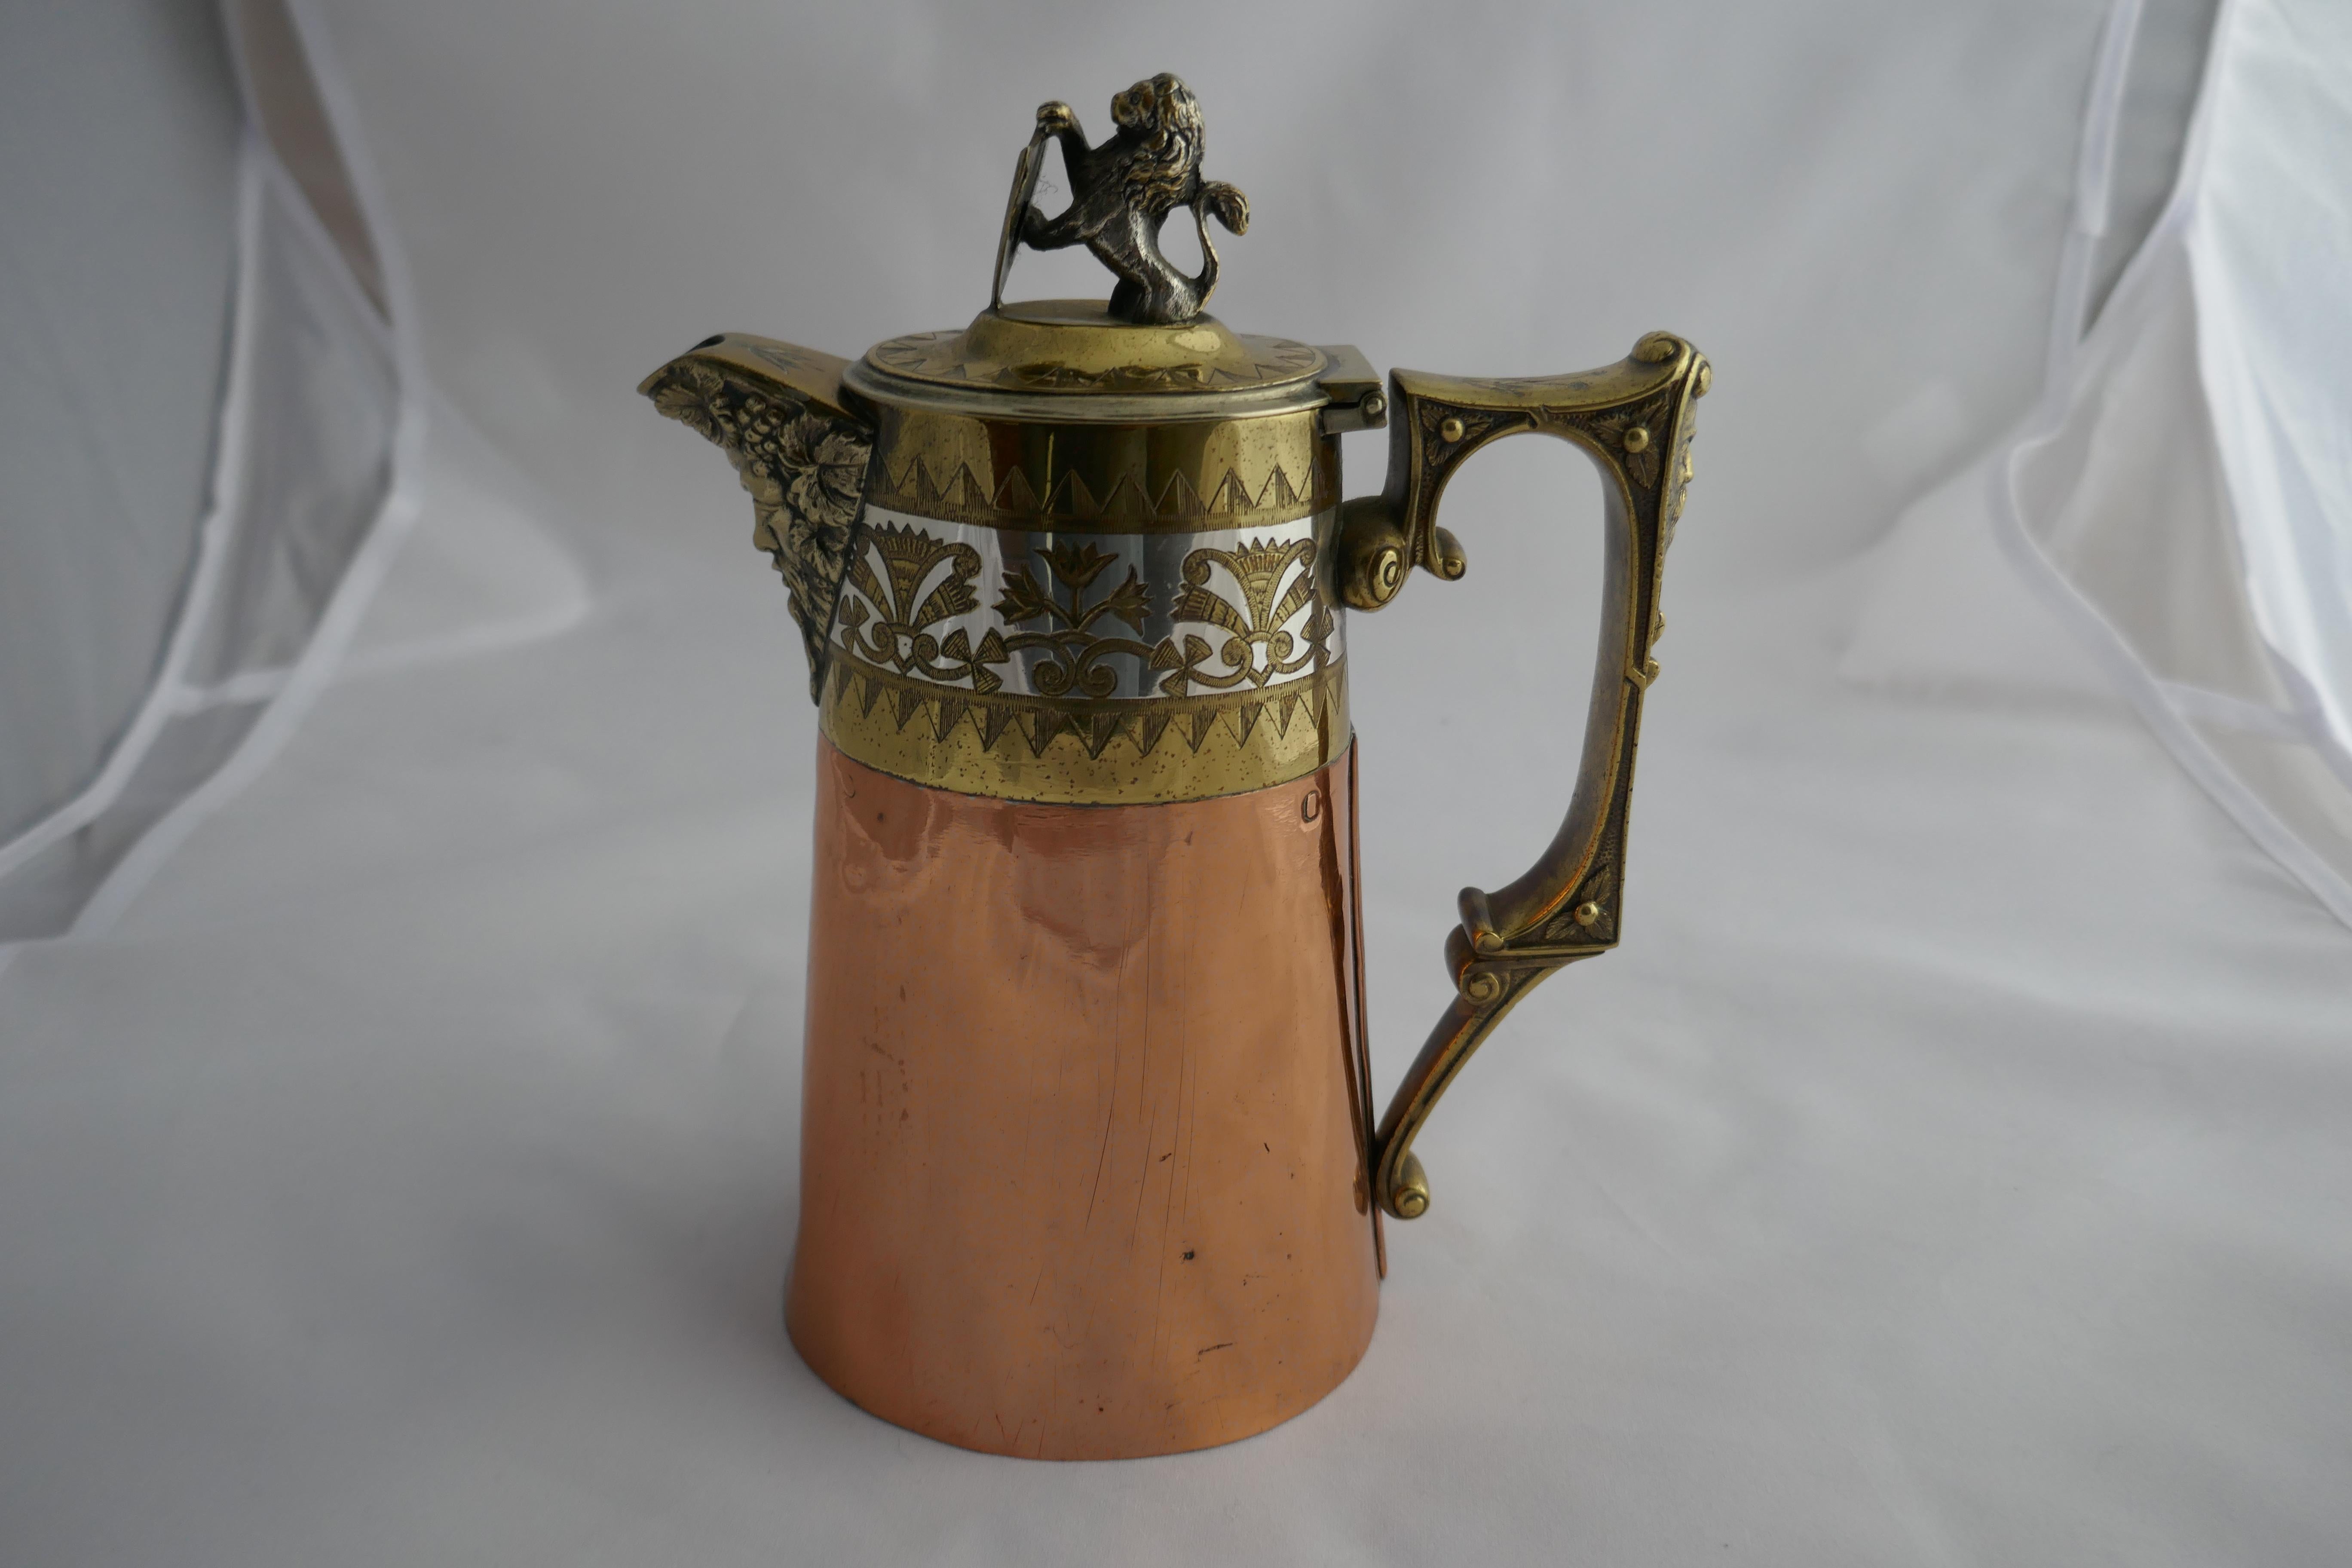 Hukin and heath coffee or chocolate pot, Arts & Crafts Gothic style

This is a very unusual piece, the main body of the pot is copper the handle and the upper section of the pot are brass and silver
The handle and spout have a grotesque face and